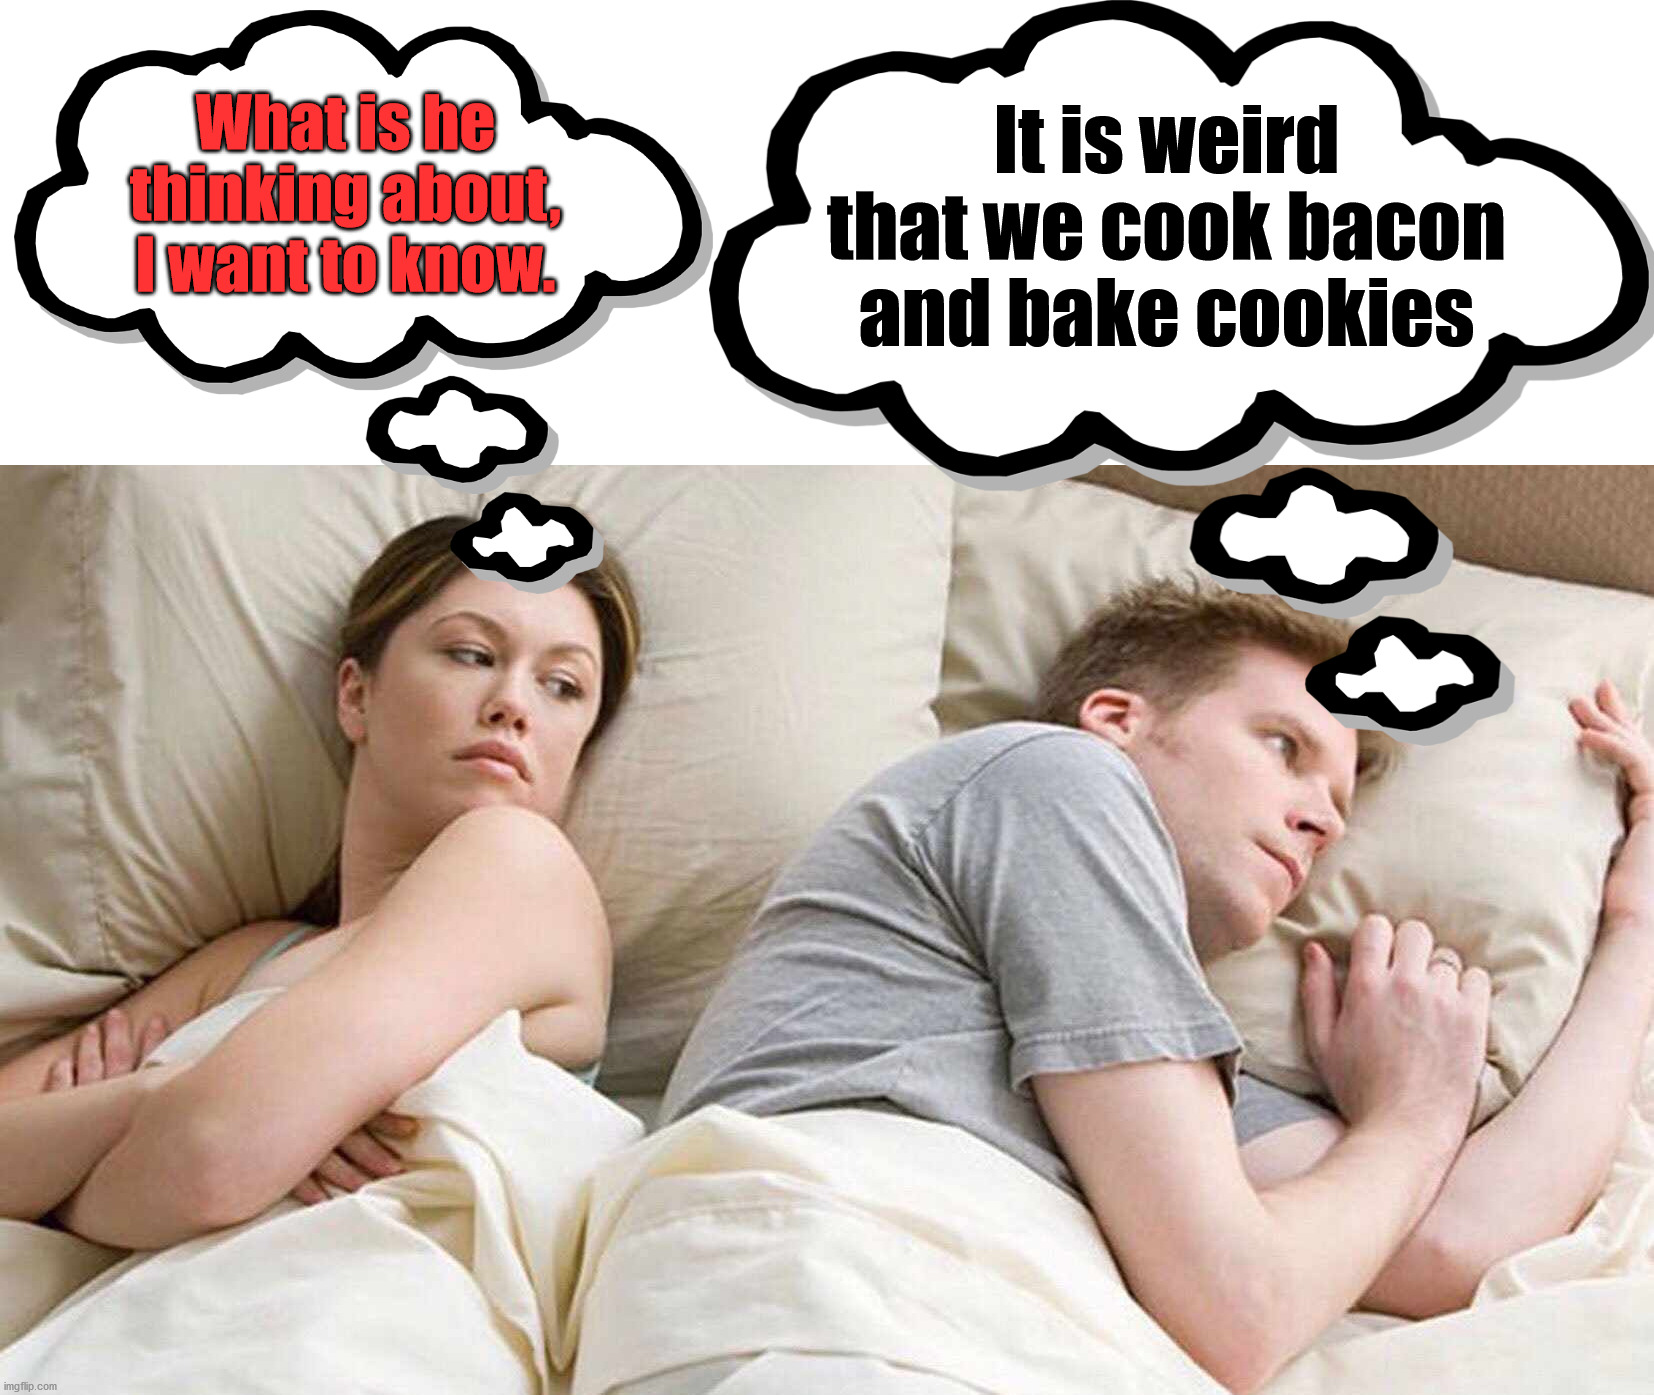 Bake bacon and cook cookies? |  What is he thinking about, I want to know. It is weird that we cook bacon and bake cookies | image tagged in i bet he's thinking about other women,cooking,cookies,bacon,baking | made w/ Imgflip meme maker